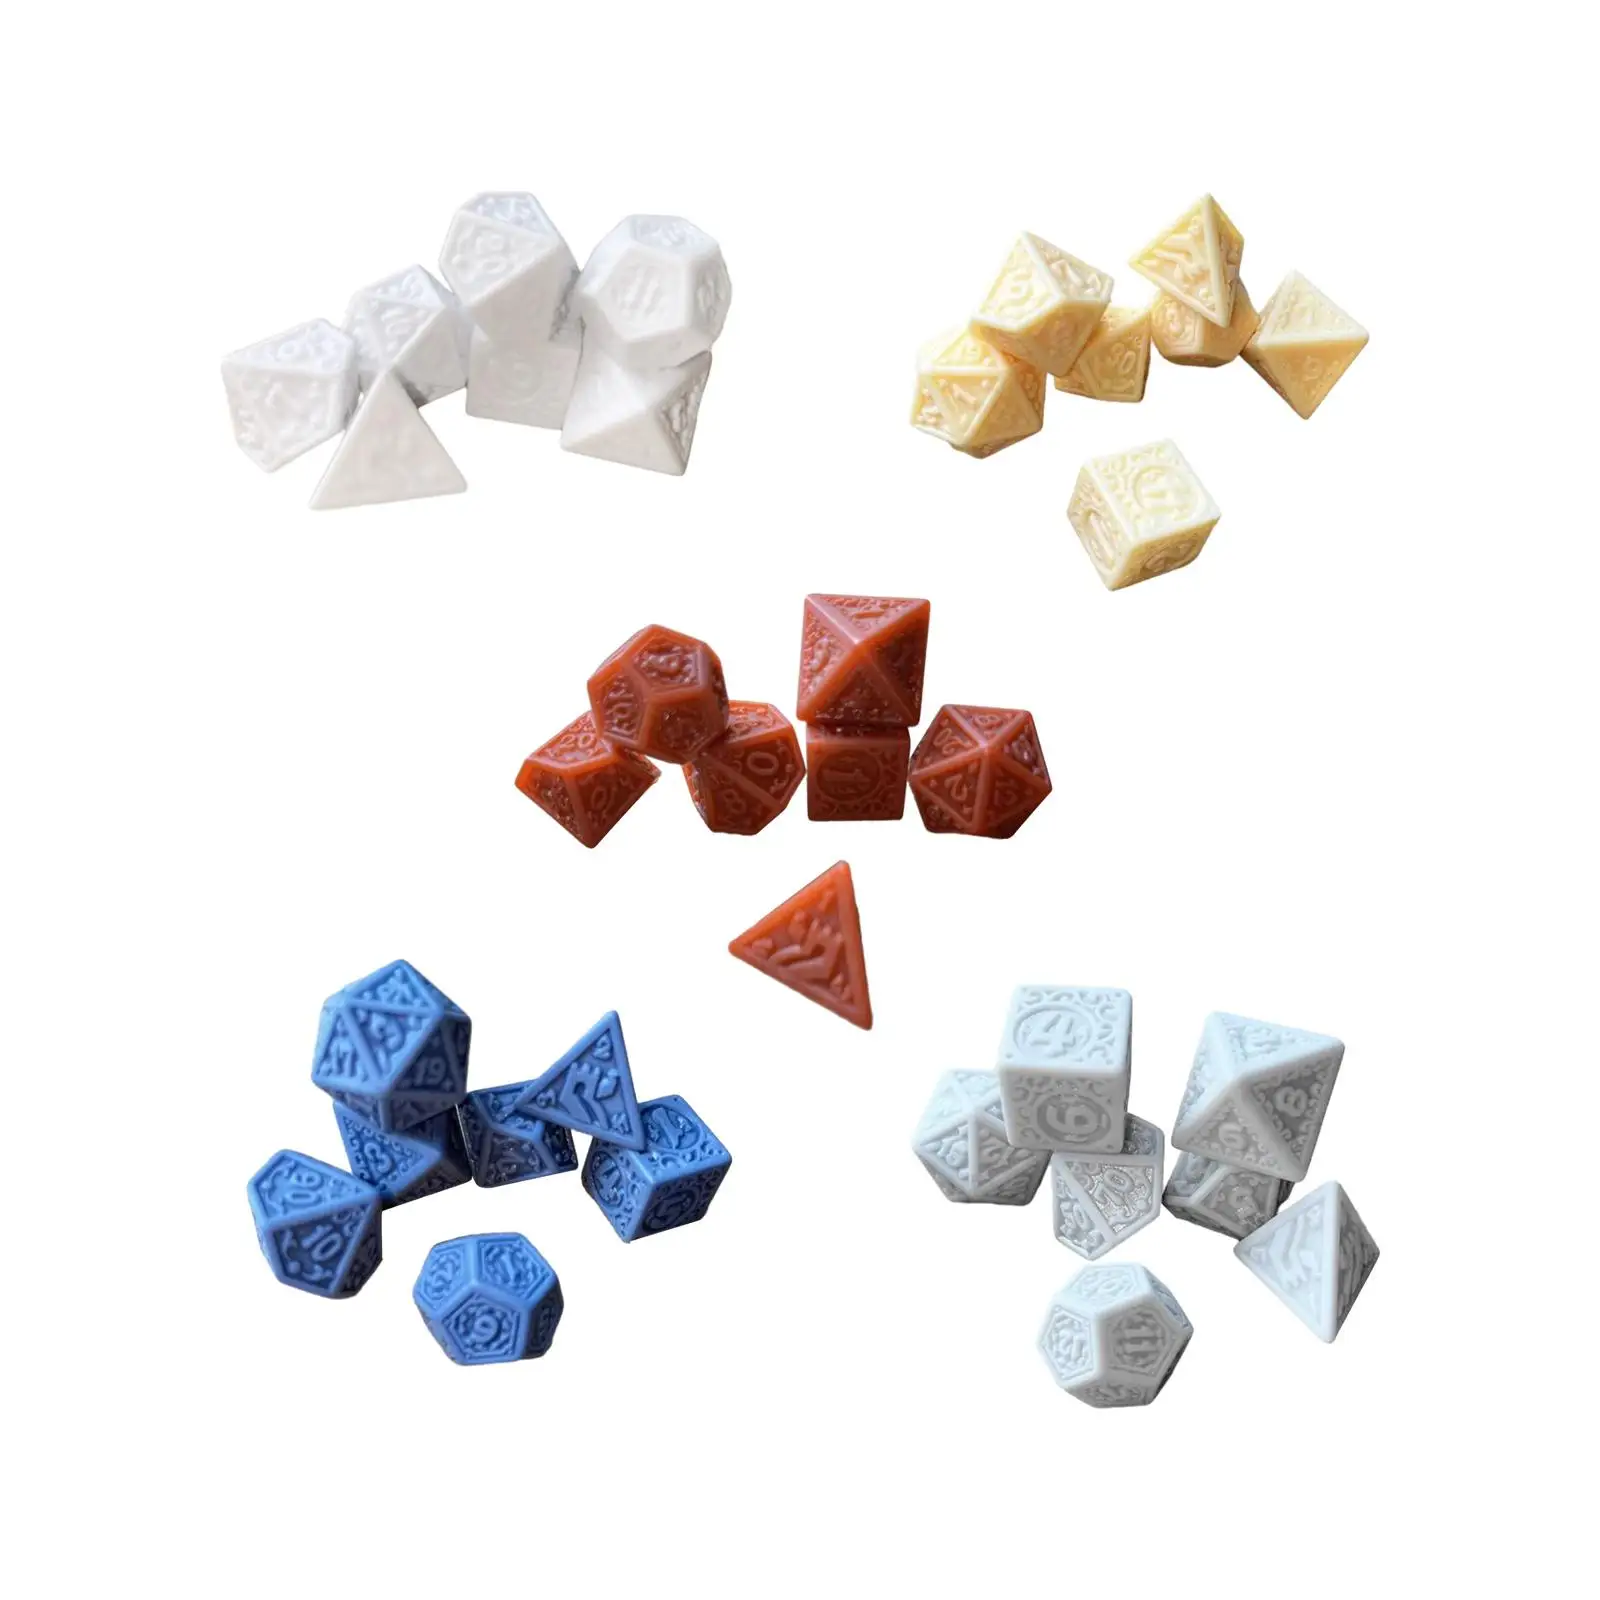 7x Game Dices Set Party Game Dices Party Favors Math Counting Teaching Aids Dice